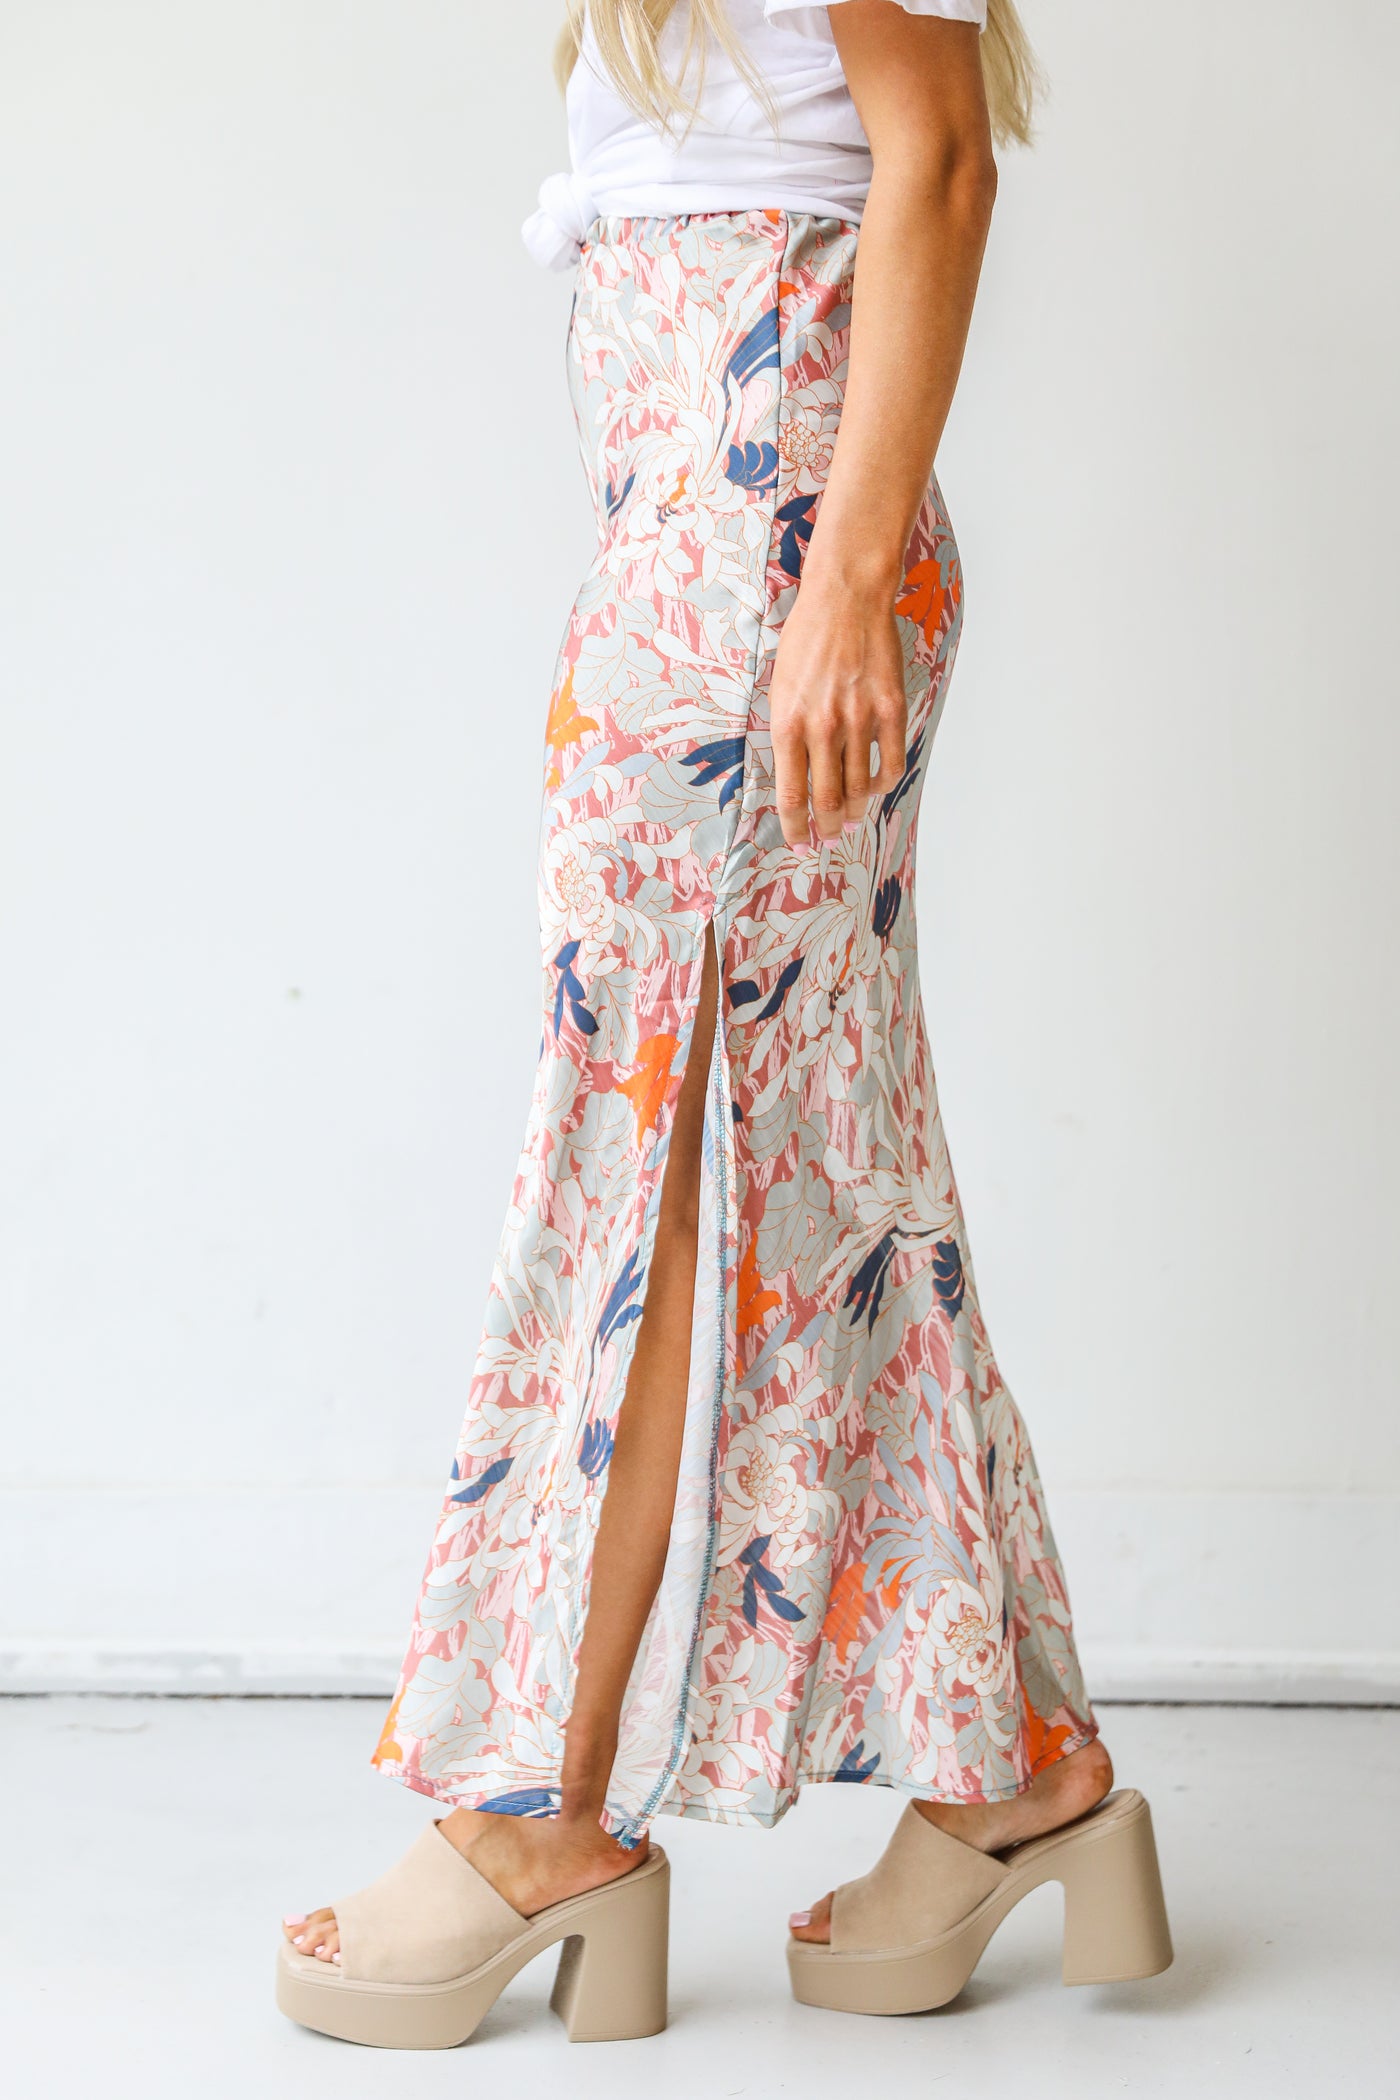 Satin Floral Maxi Skirt  side view